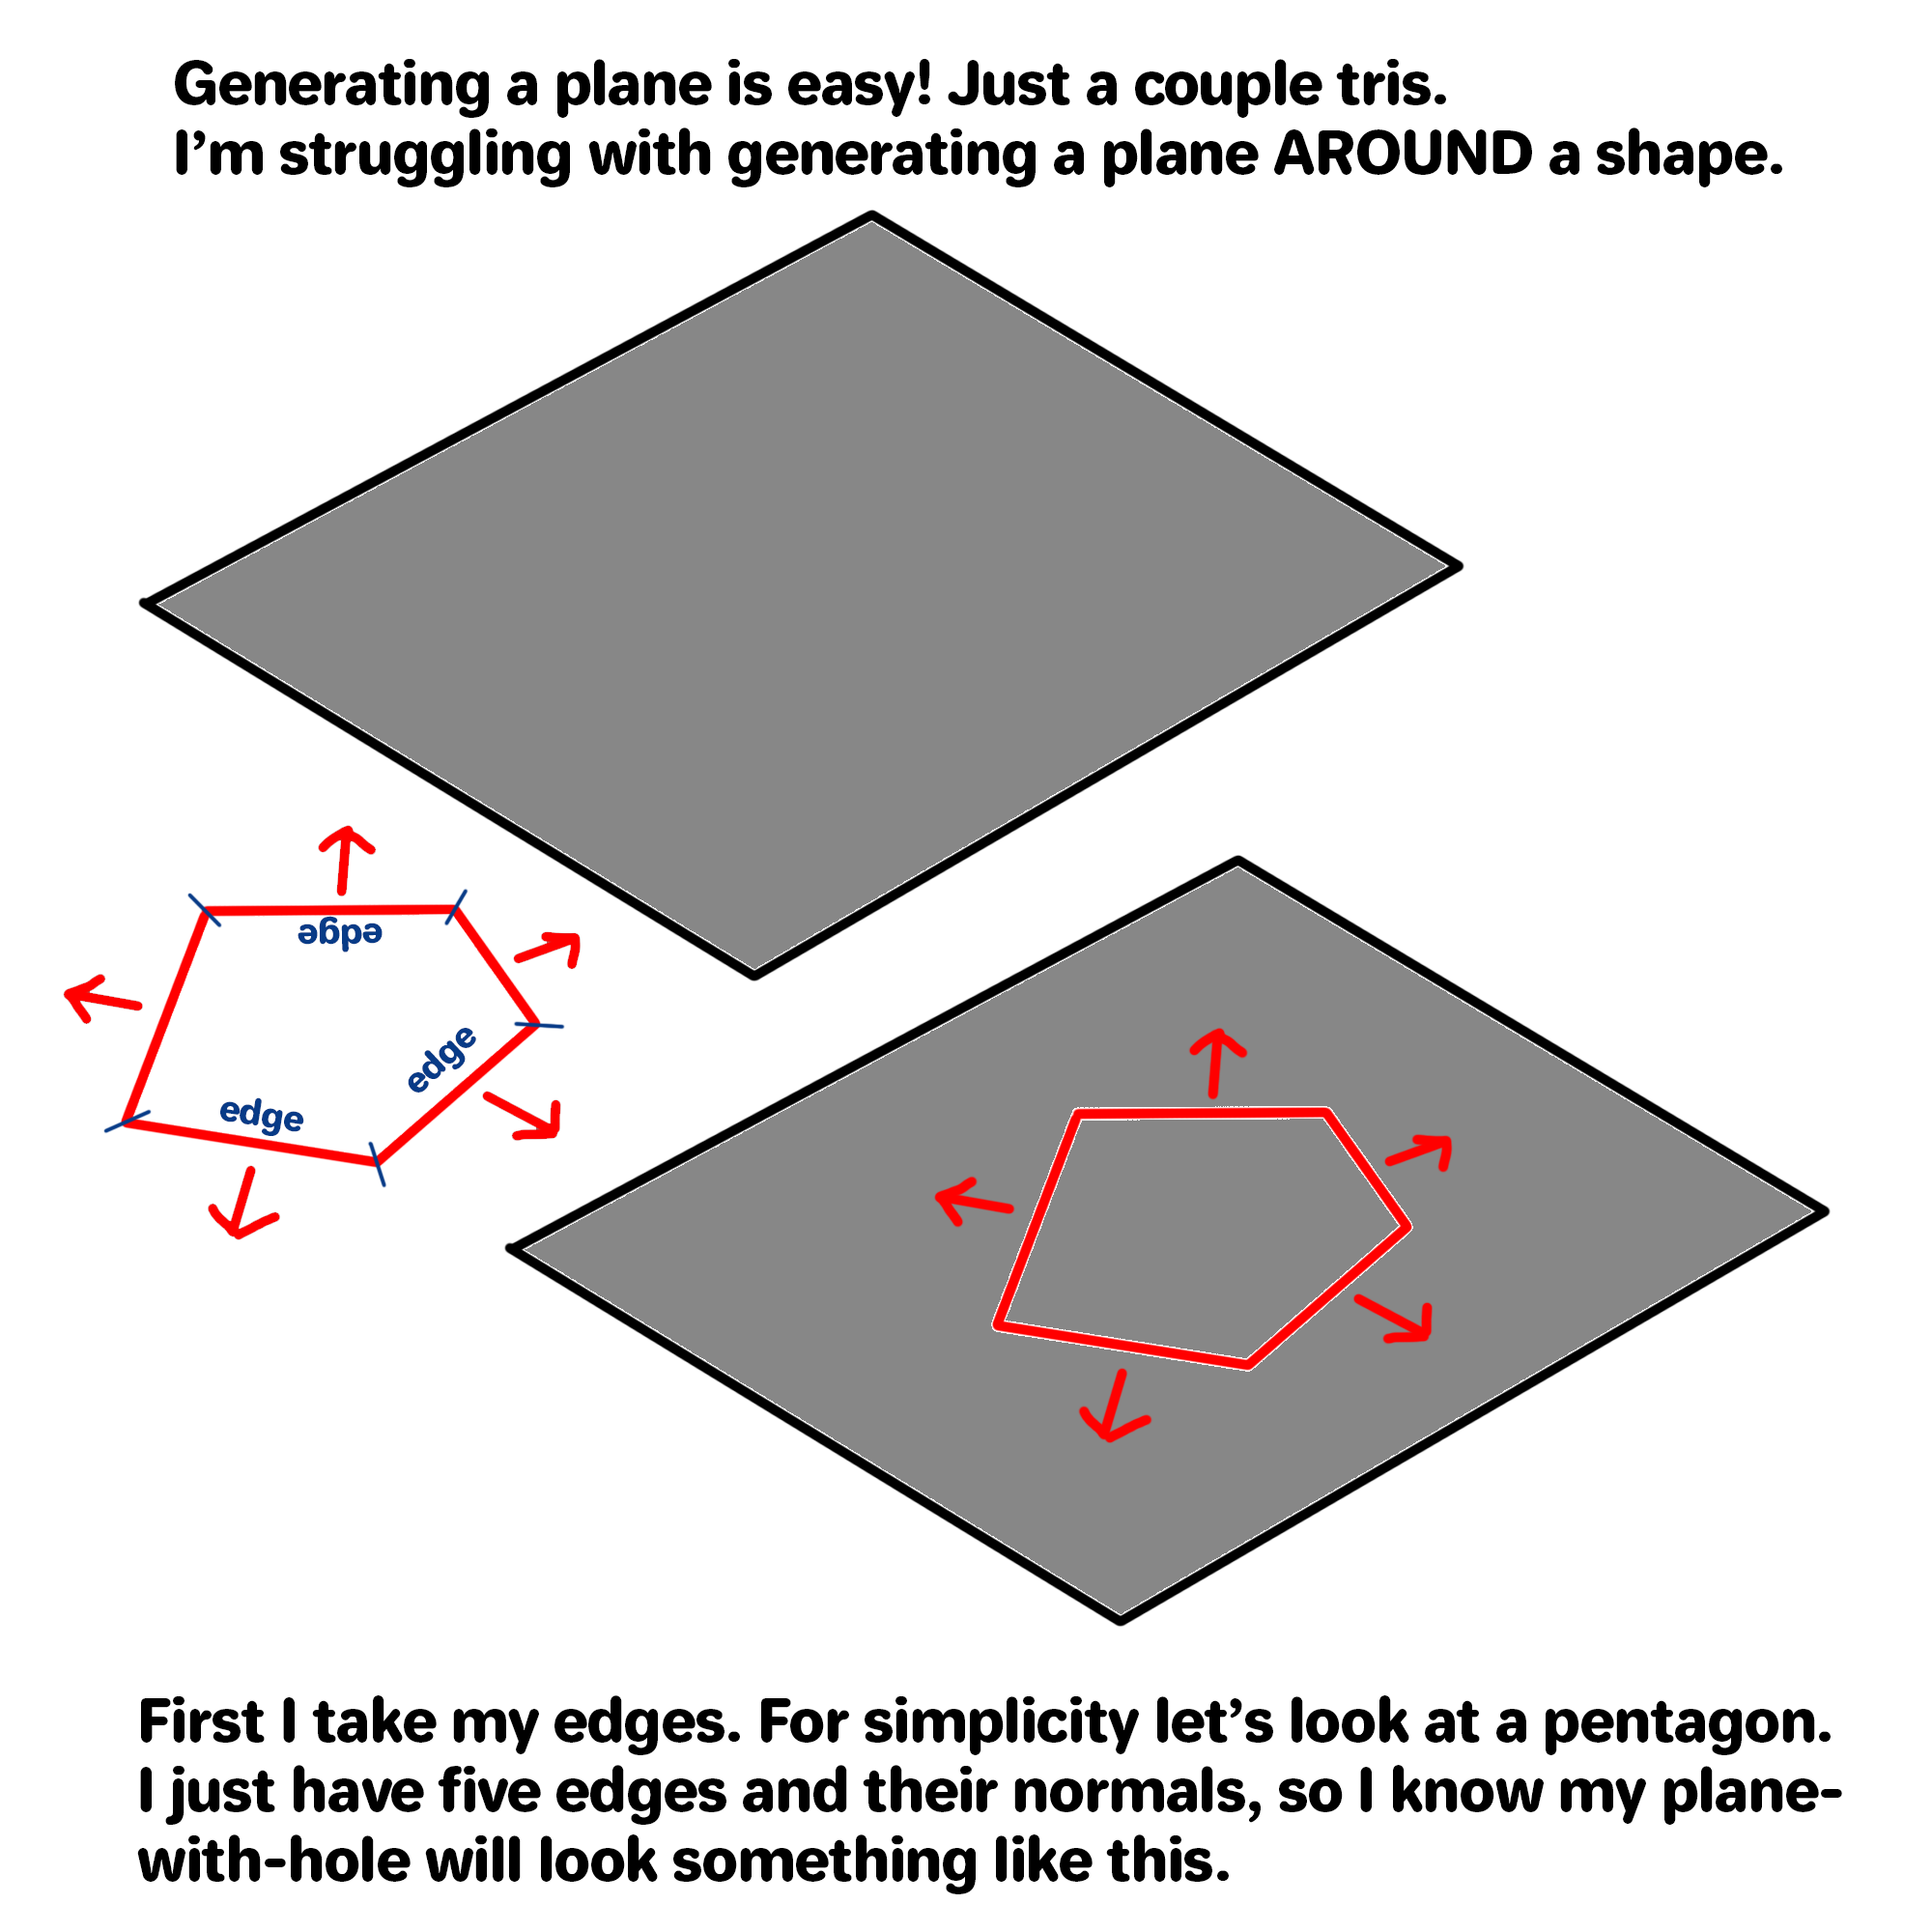 Generating a plane is easy. I'm struggling with generating the plane around a shape.